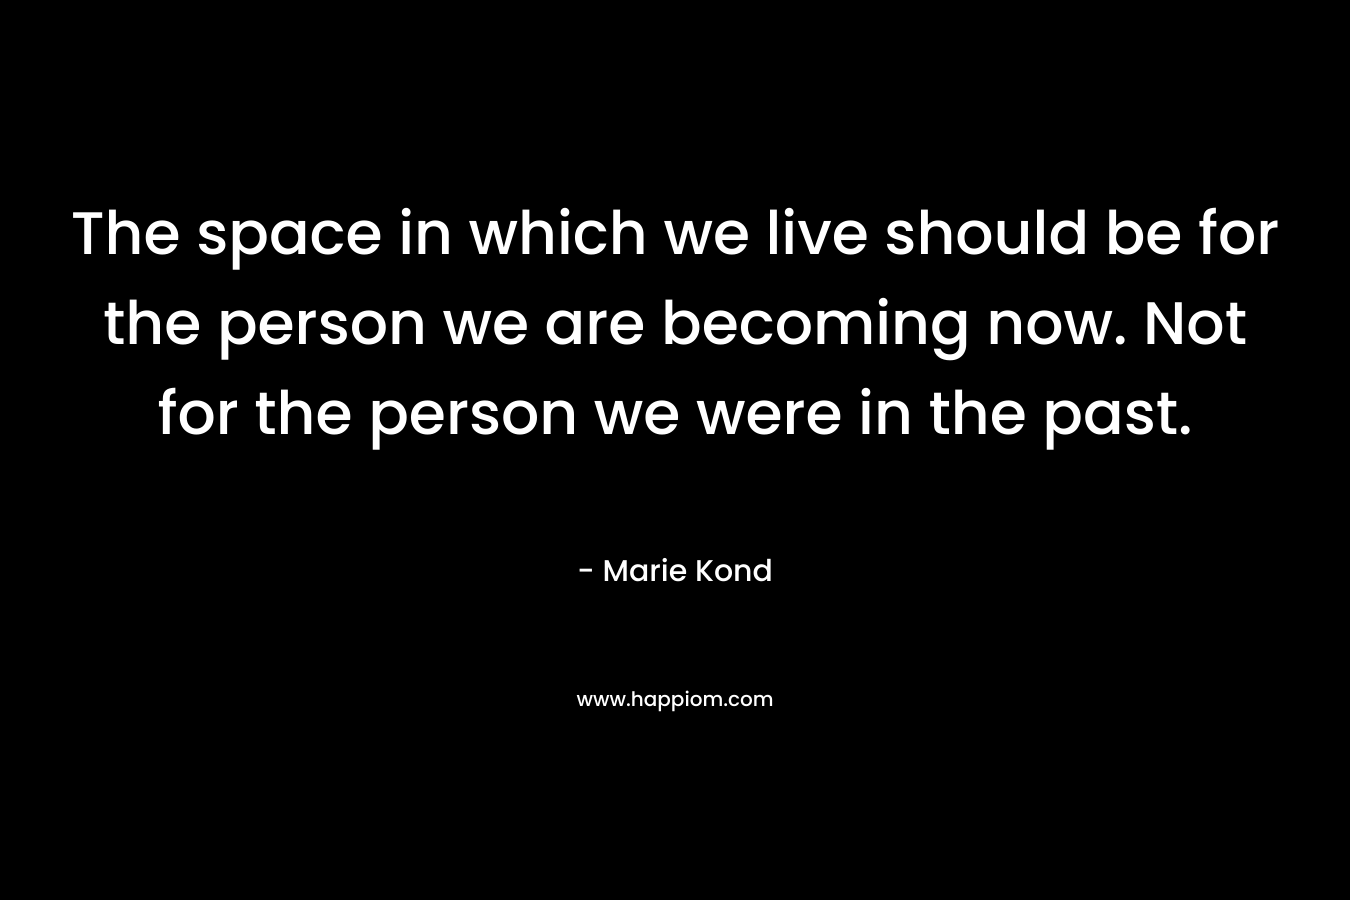 The space in which we live should be for the person we are becoming now. Not for the person we were in the past. – Marie Kond